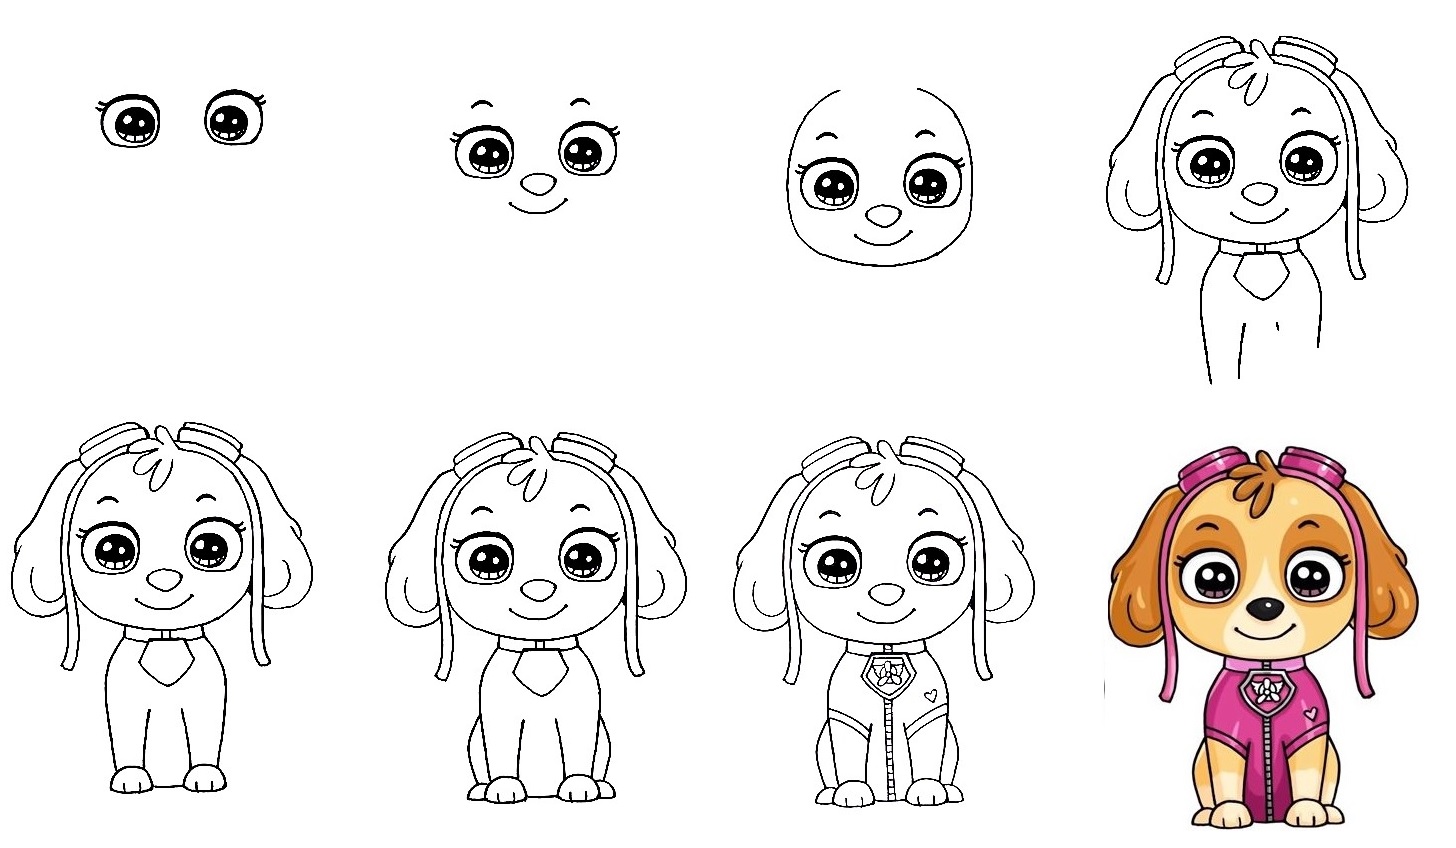 How To Draw Skye From Paw Patrol The Details Instructions